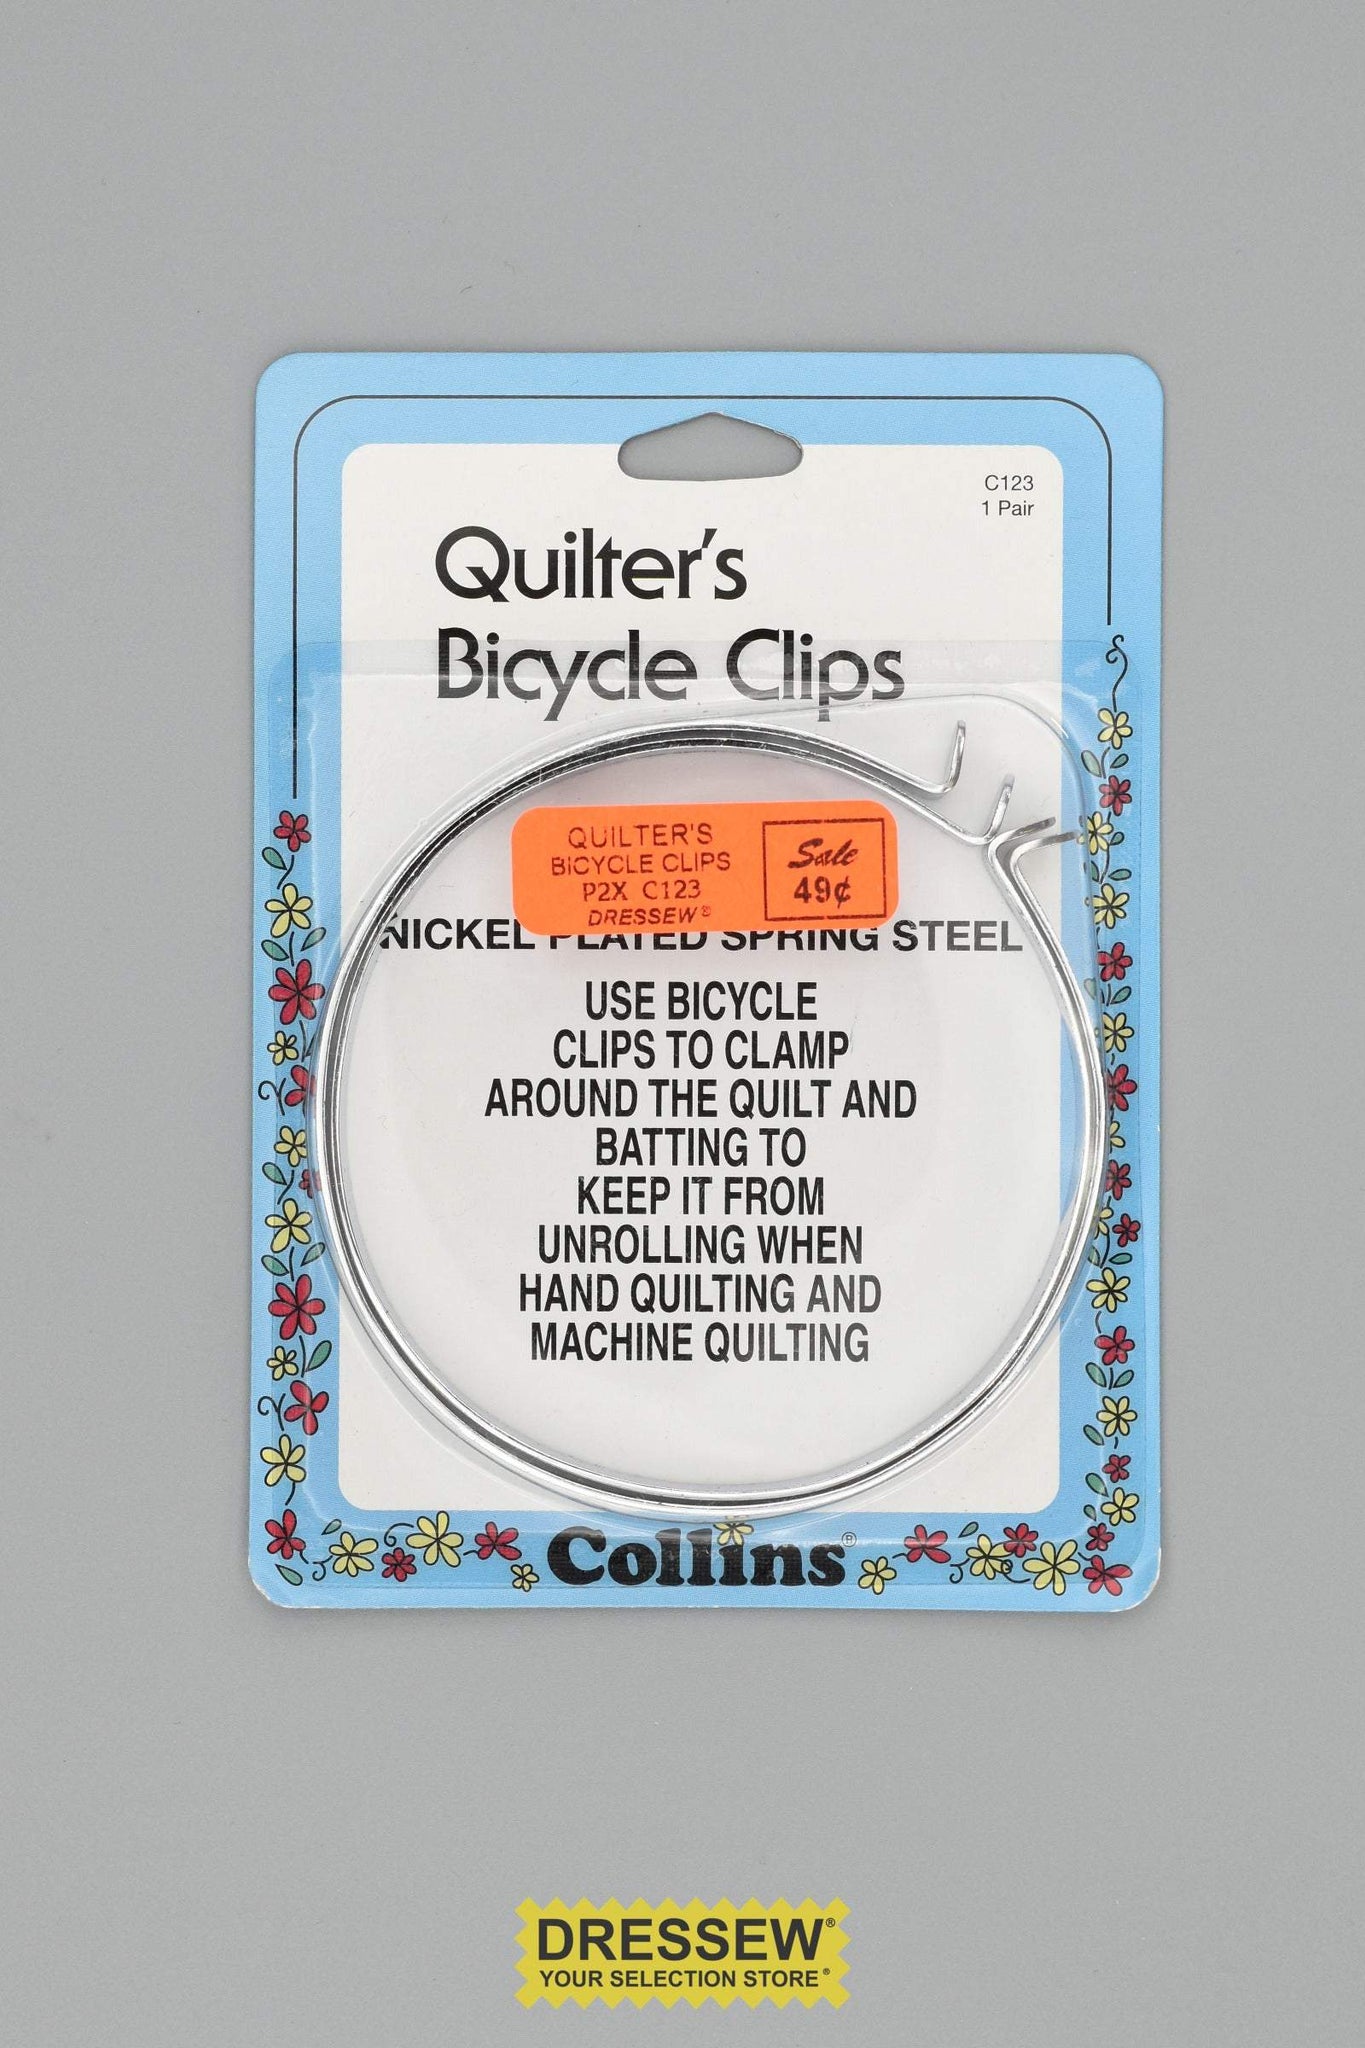 Quilter's Bicycle Clips